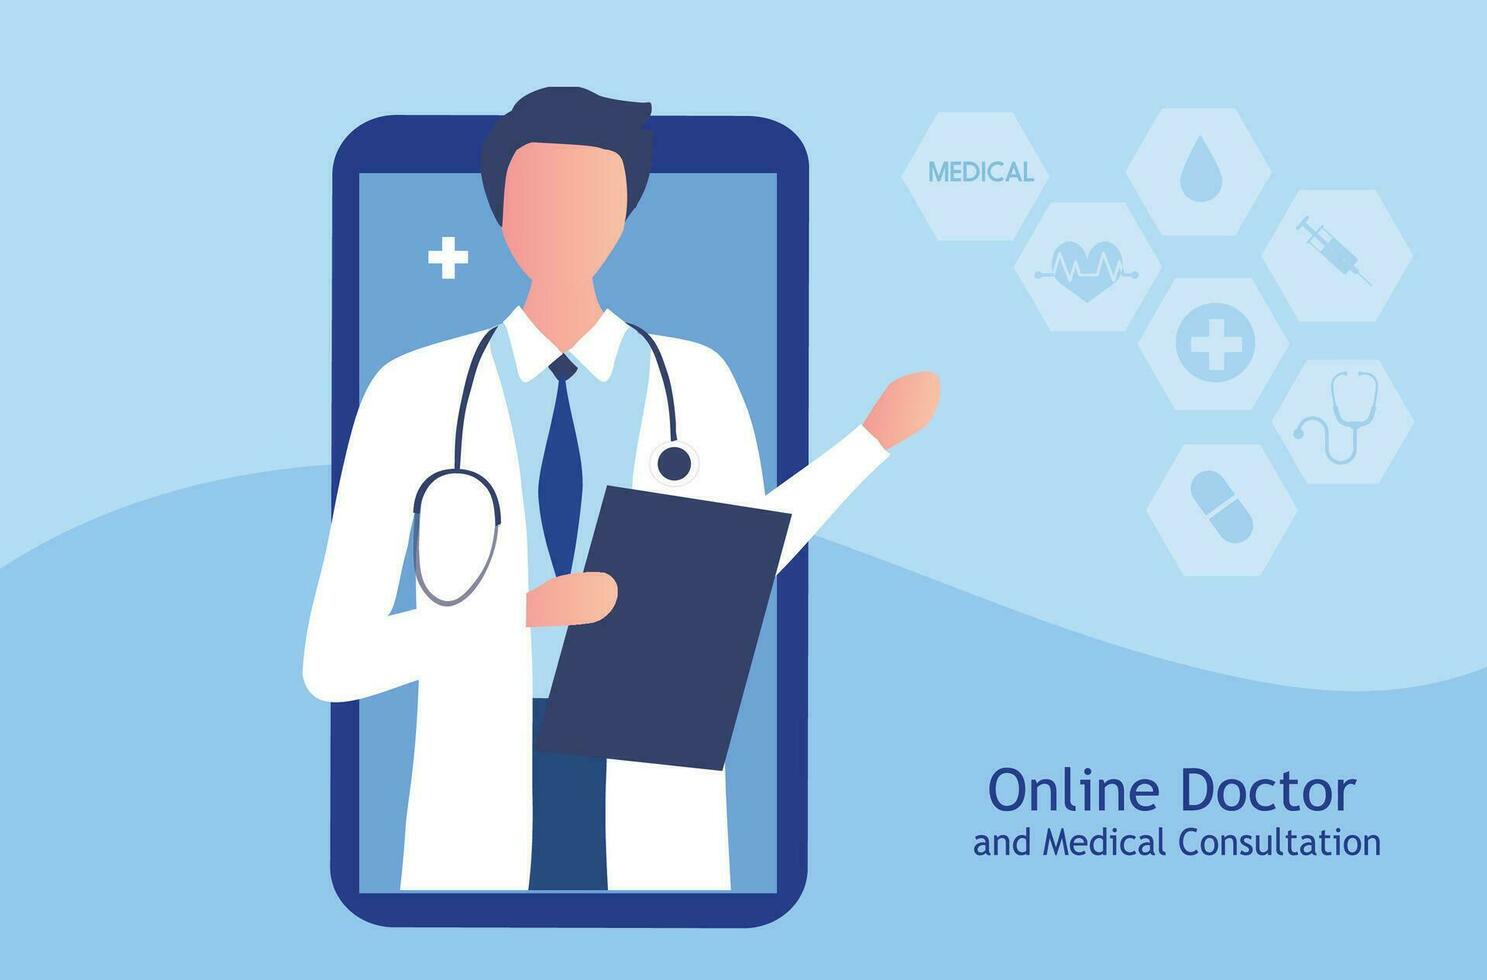 Online doctor and medical consultation concept. Online consultation with doctor service vector illustration. Online medical service and telemedicine concept